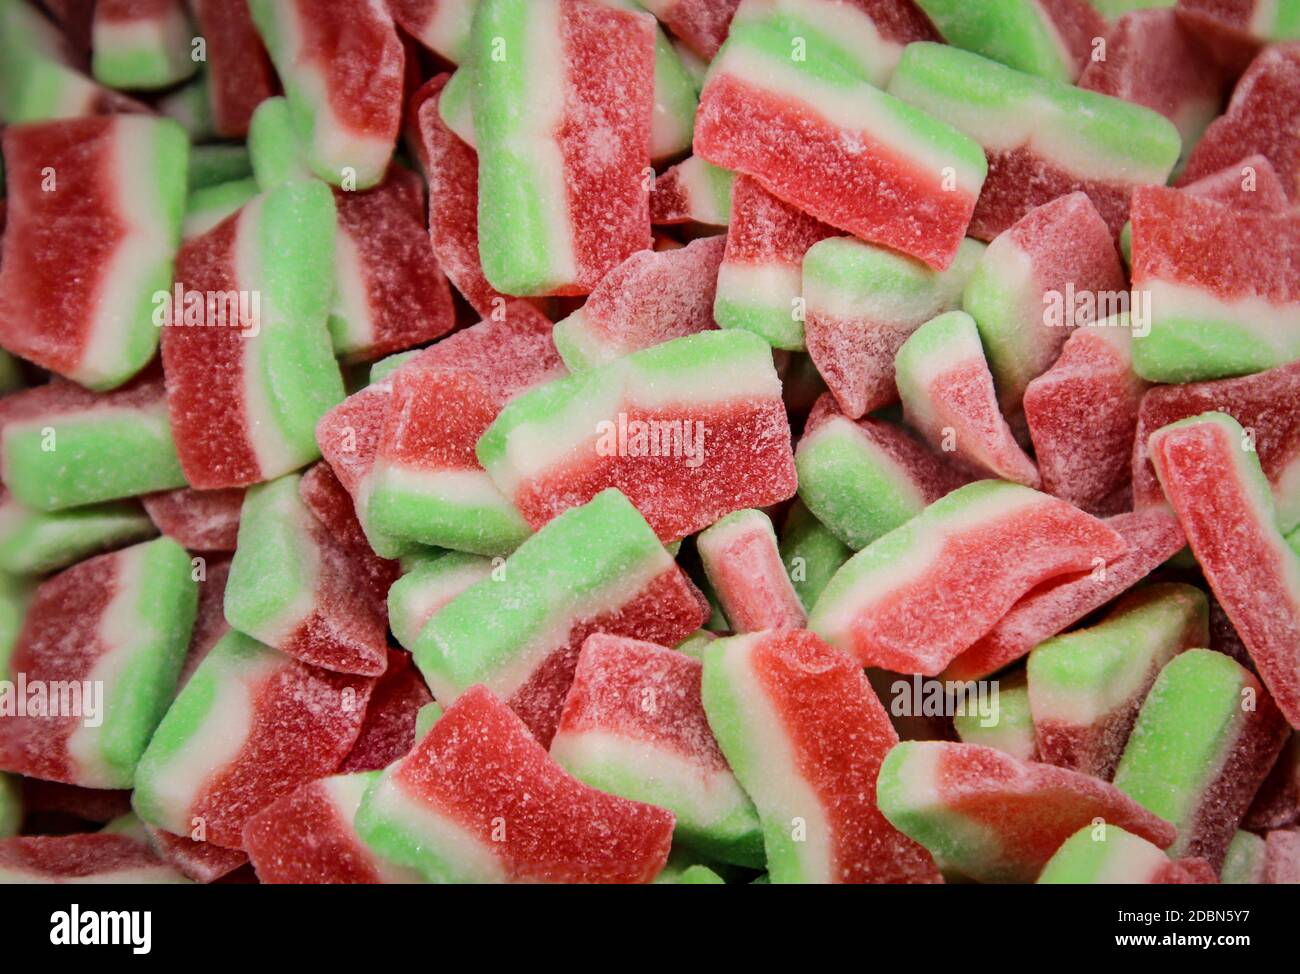 Lots of sweets are waiting for the sweet tooth Stock Photo